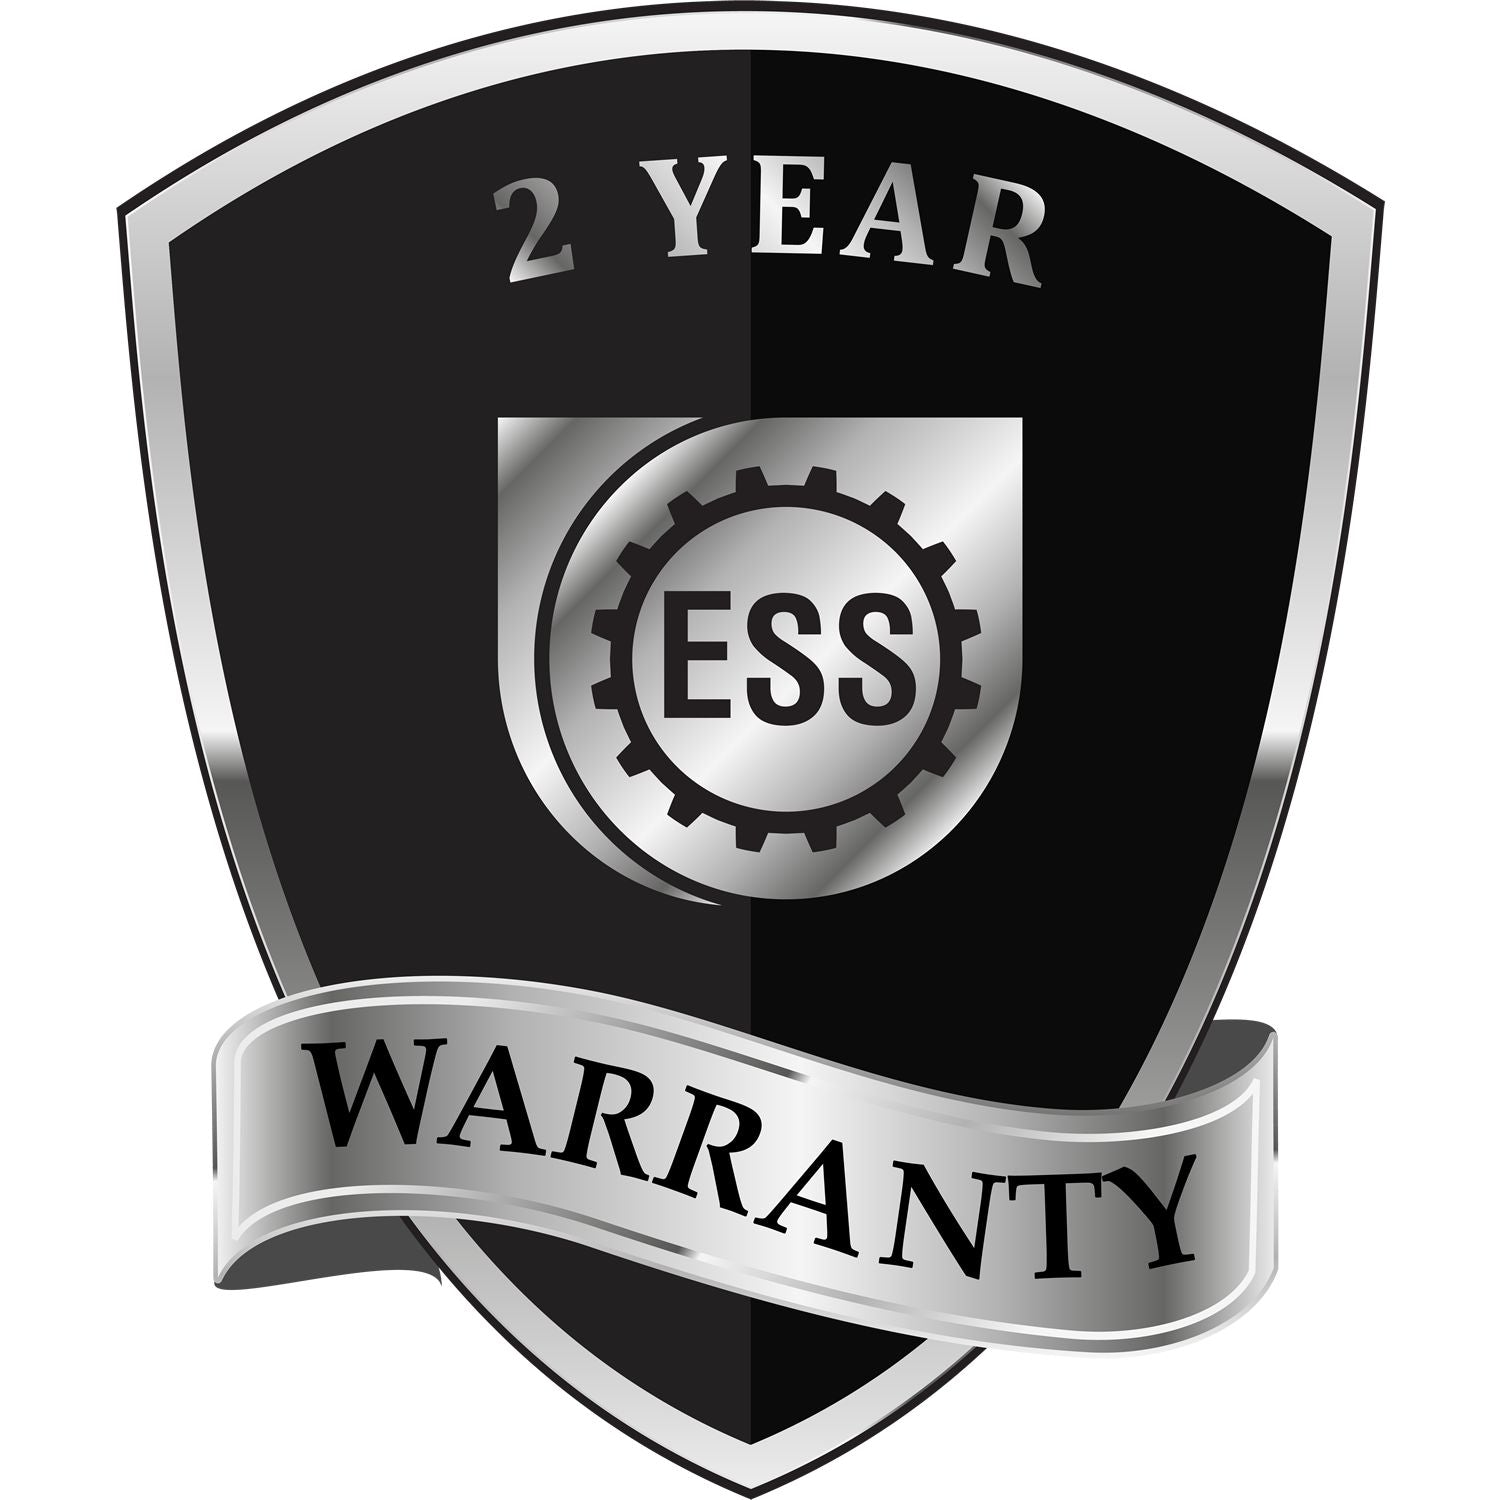 A badge or emblem showing a warranty icon for the Heavy Duty Cast Iron North Dakota Land Surveyor Seal Embosser